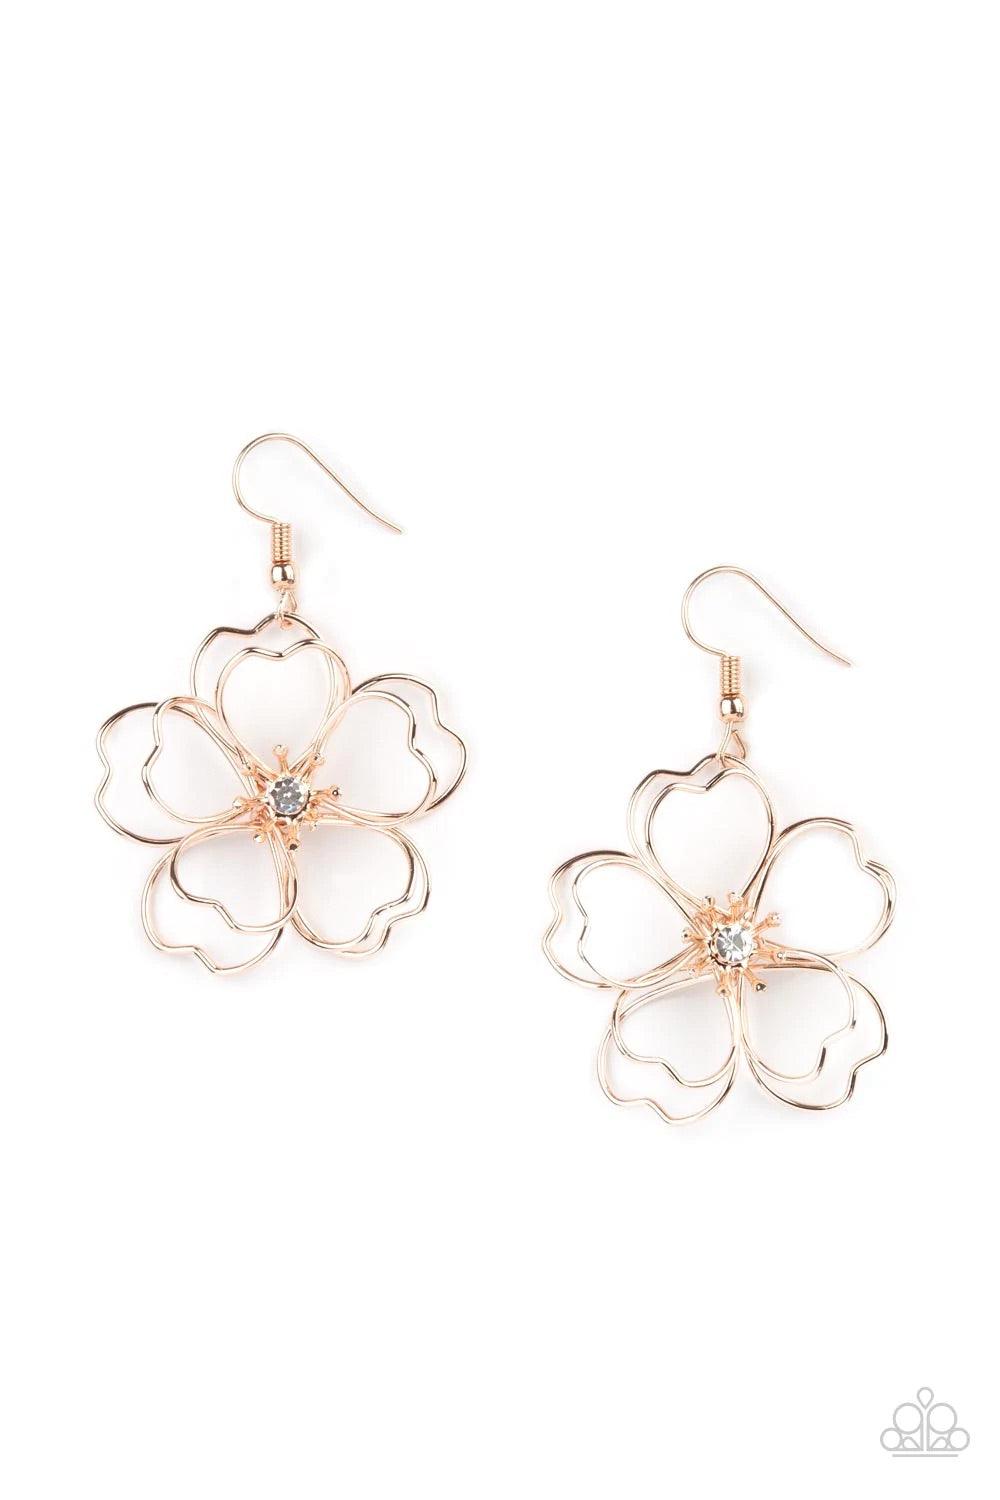 Paparazzi Accessories Petal Power - Rose Gold Layers of heart-shaped petals molded from shiny rose gold wire create an airy three-dimensional flower. A dainty white rhinestone dots the center adding sparkle to the whimsical frame. Earring attaches to a st